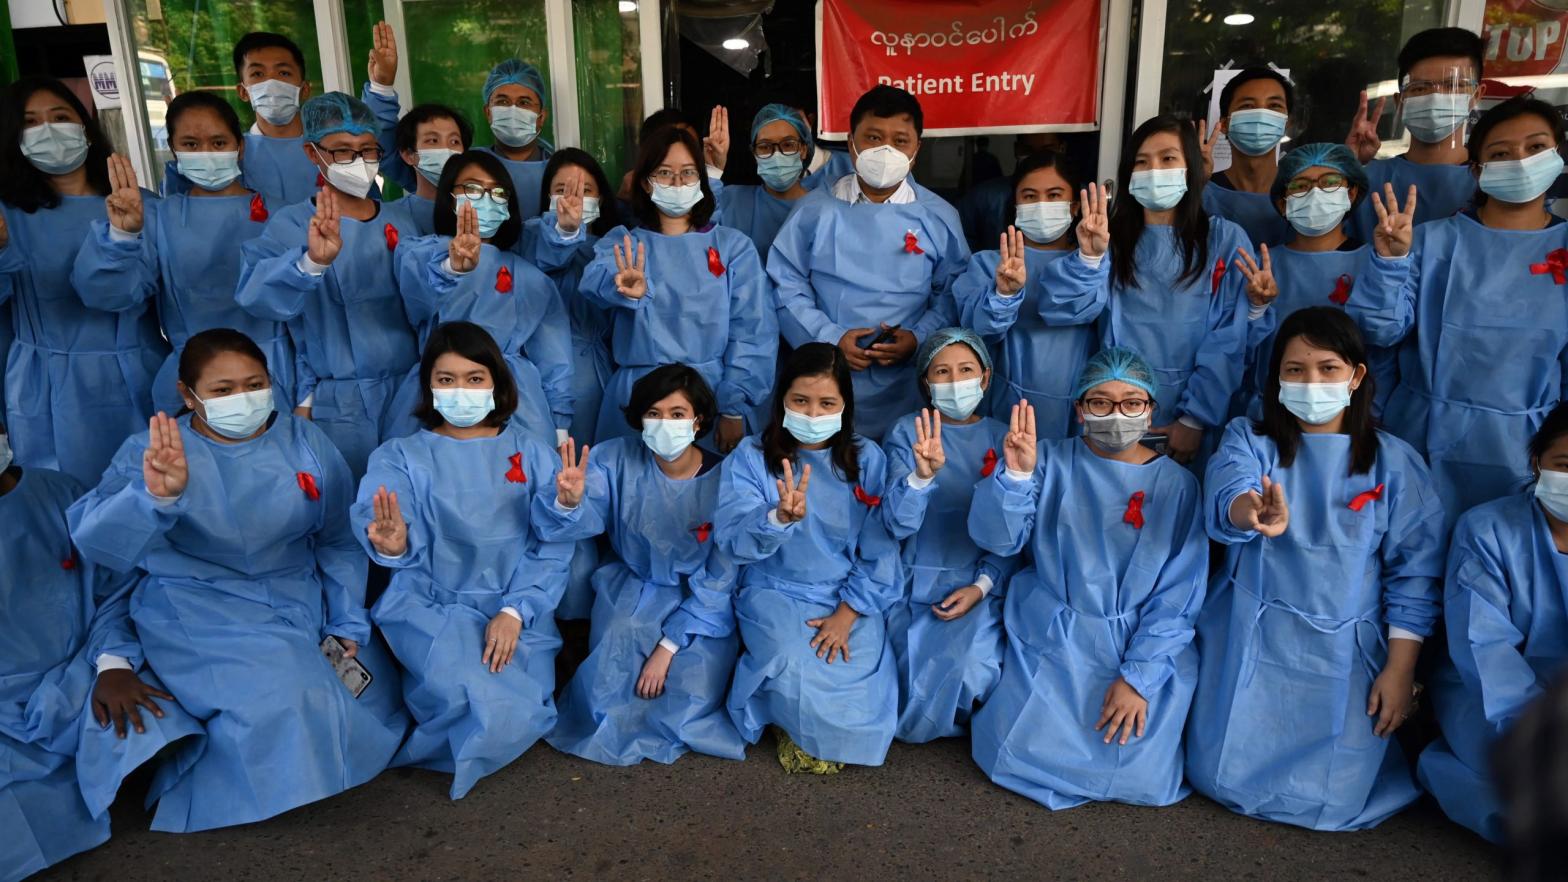 Medical staff makes a three finger salute with a red ribbons on their uniform at the Yangon General Hospital in Yangon on February 3, 2021. (Photo: STR/AFP, Getty Images)